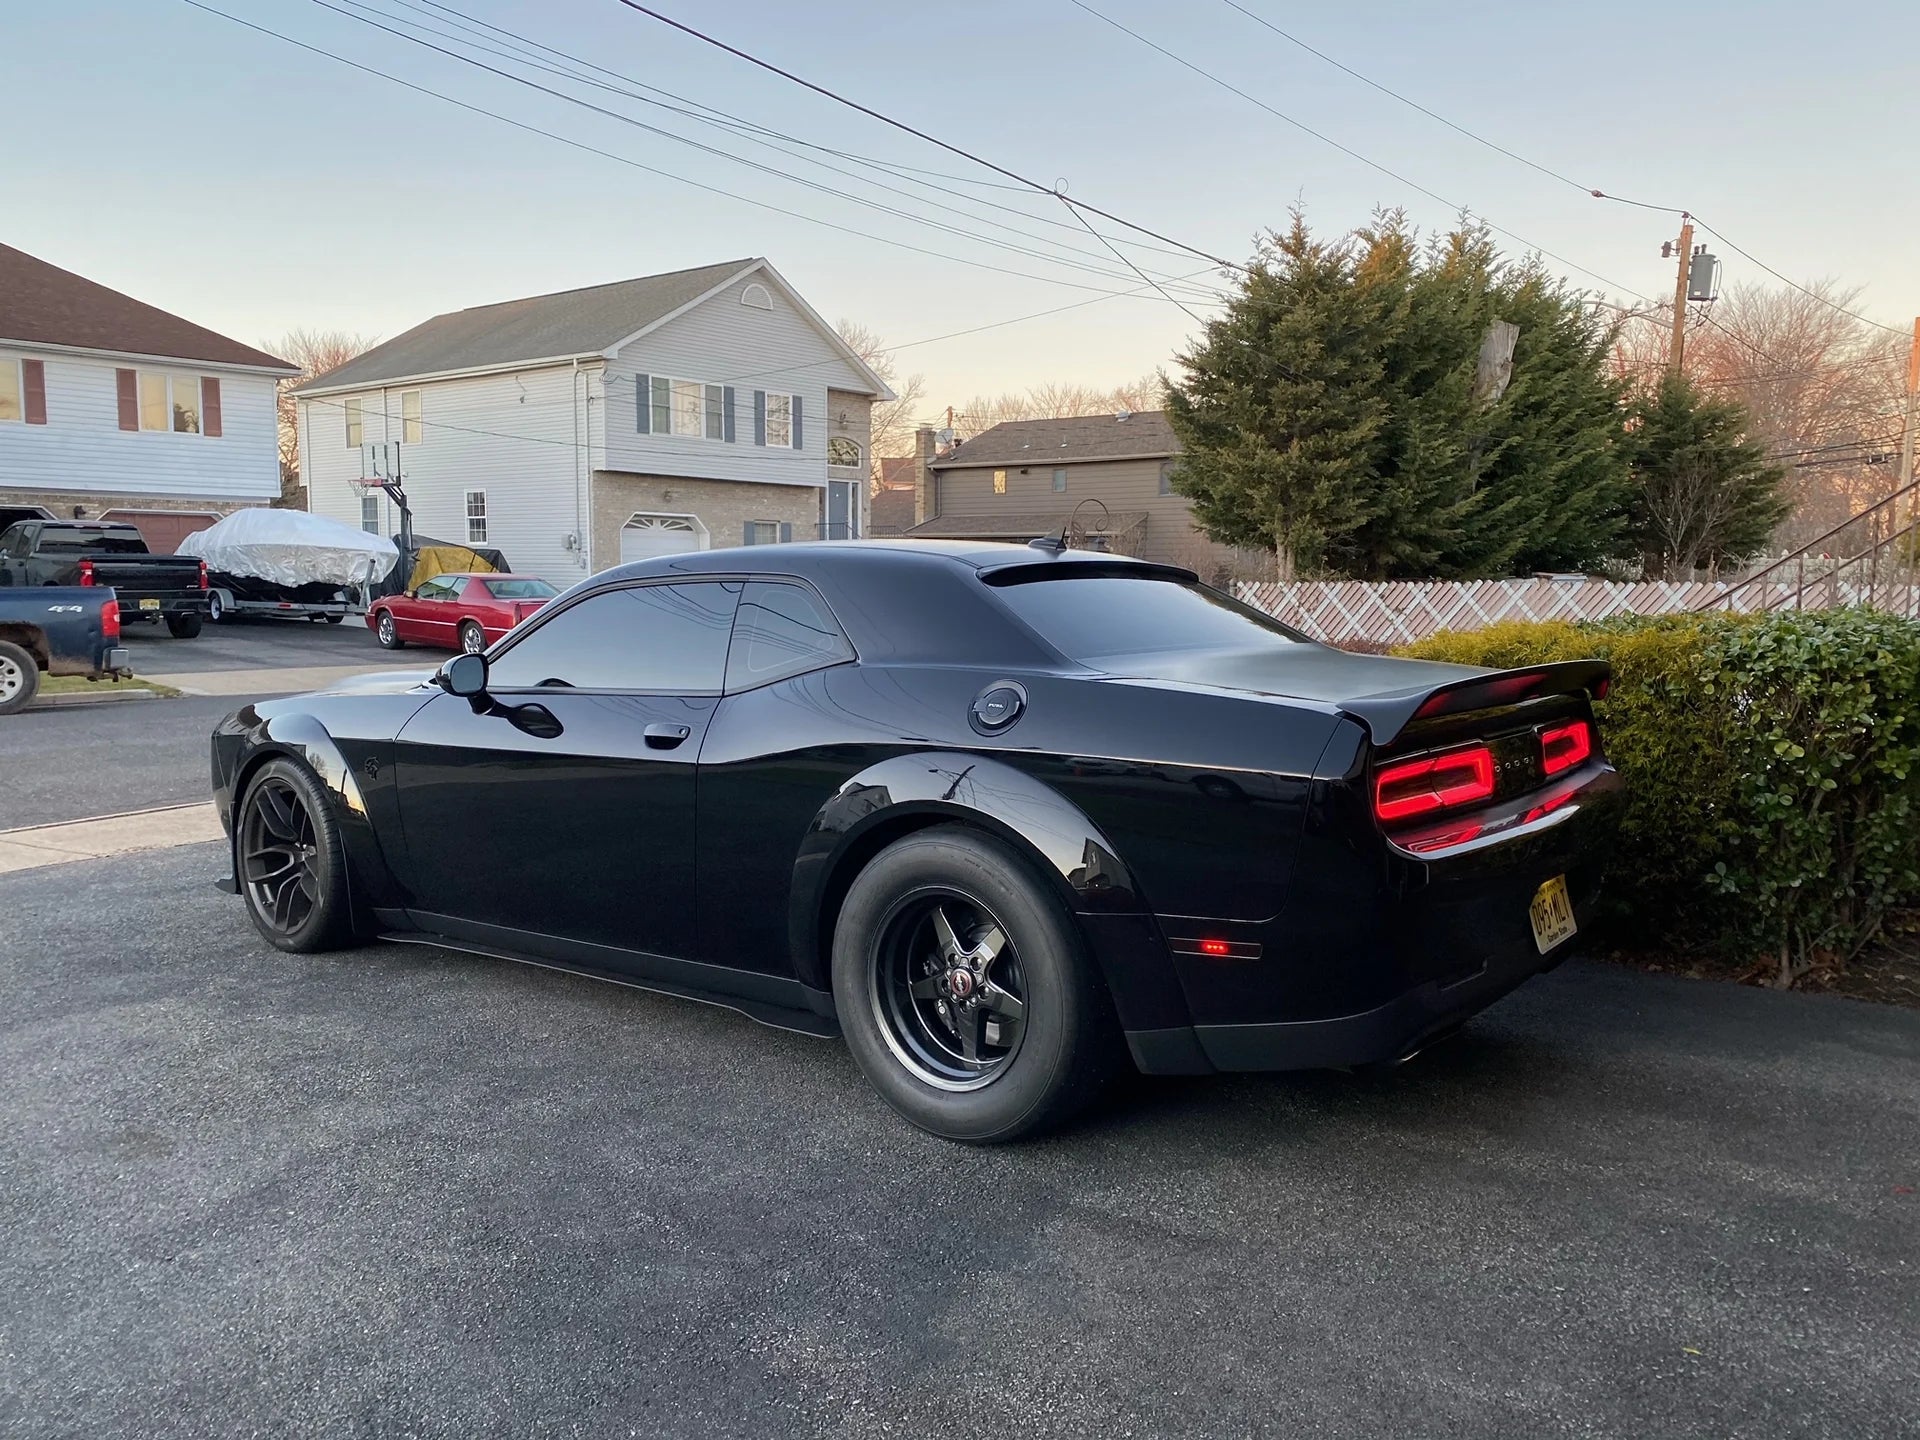 Dodge Charger Challenger 300 Budget Rear Drag Pack With 315 50 ET STREET R Tires